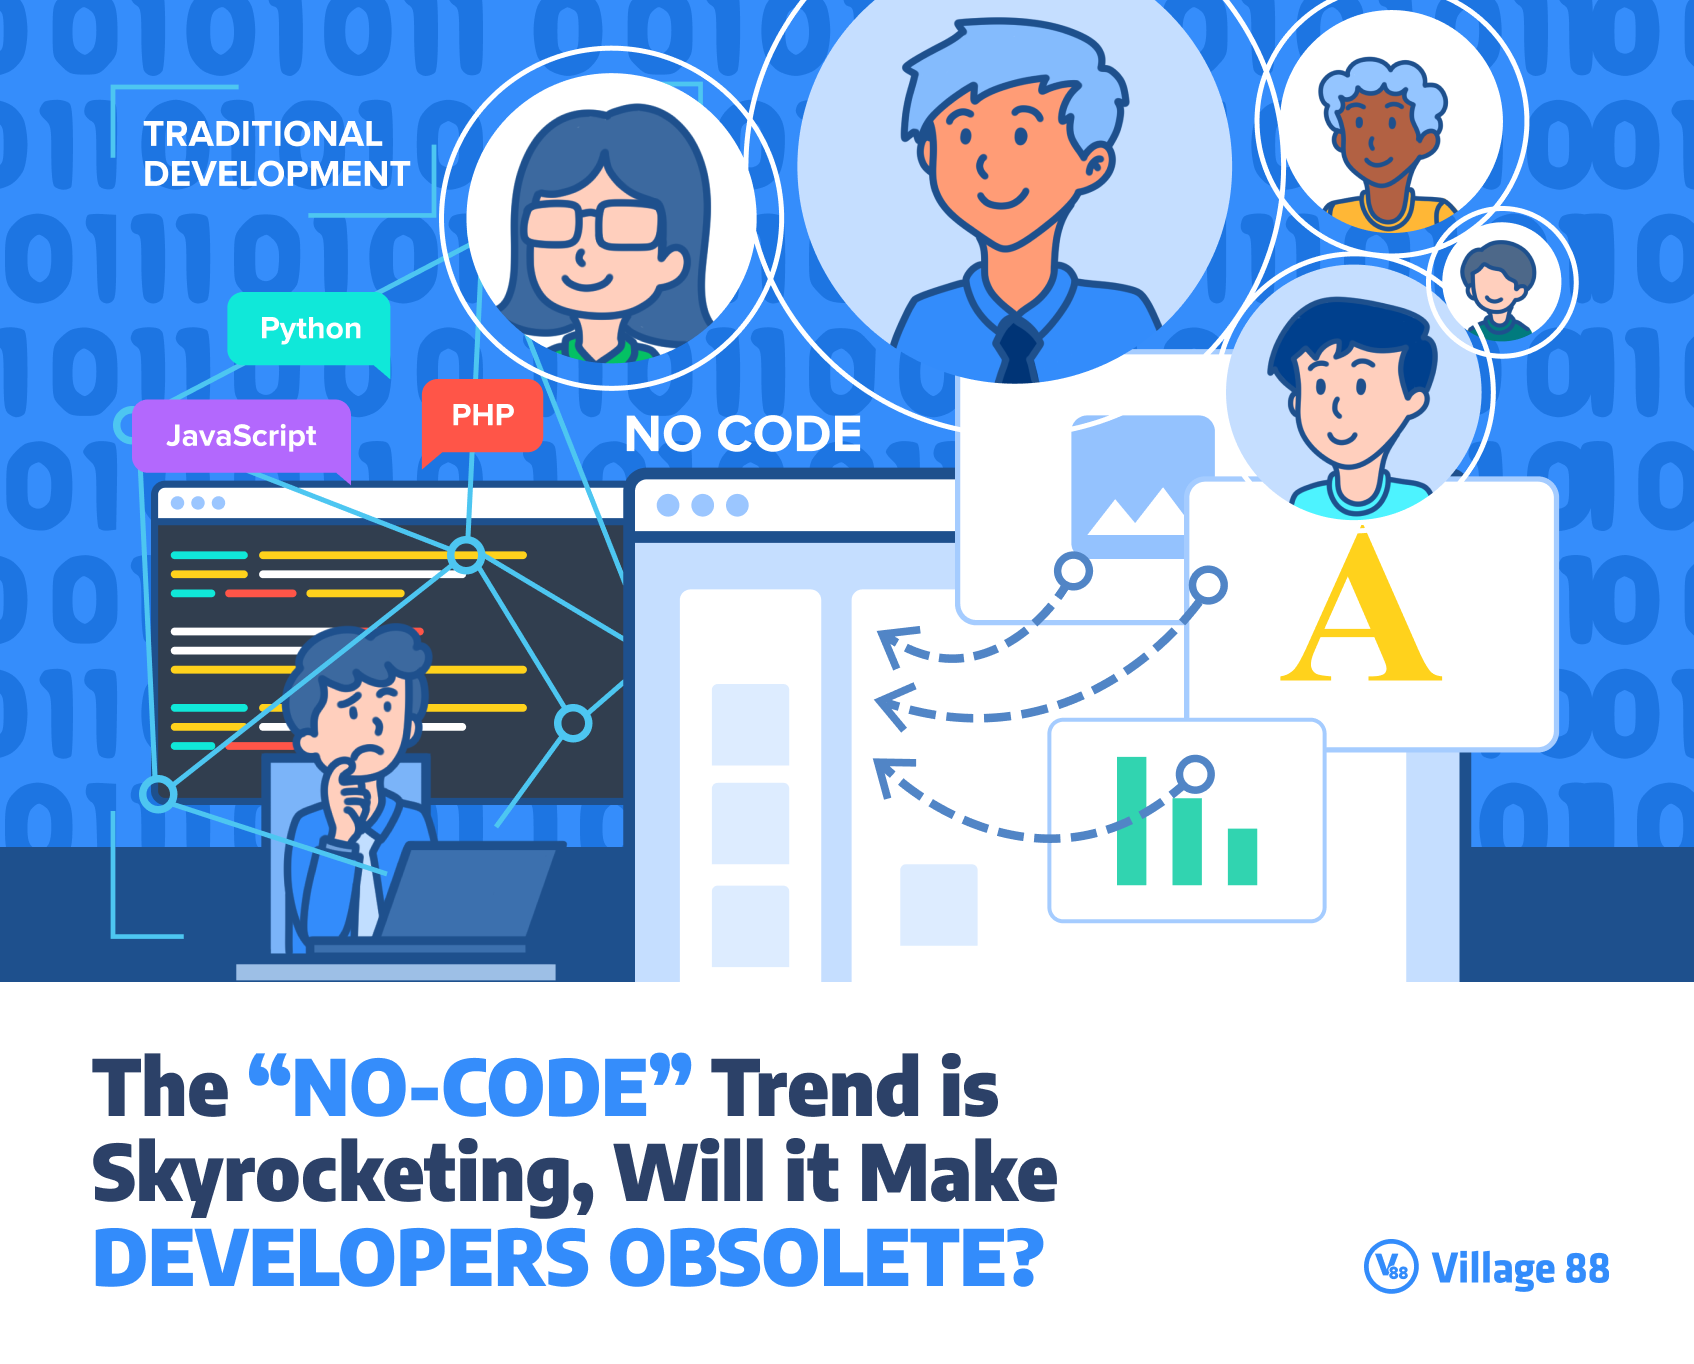 The “No-Code” Trend is Skyrocketing, Will it Make Developers Obsolete?